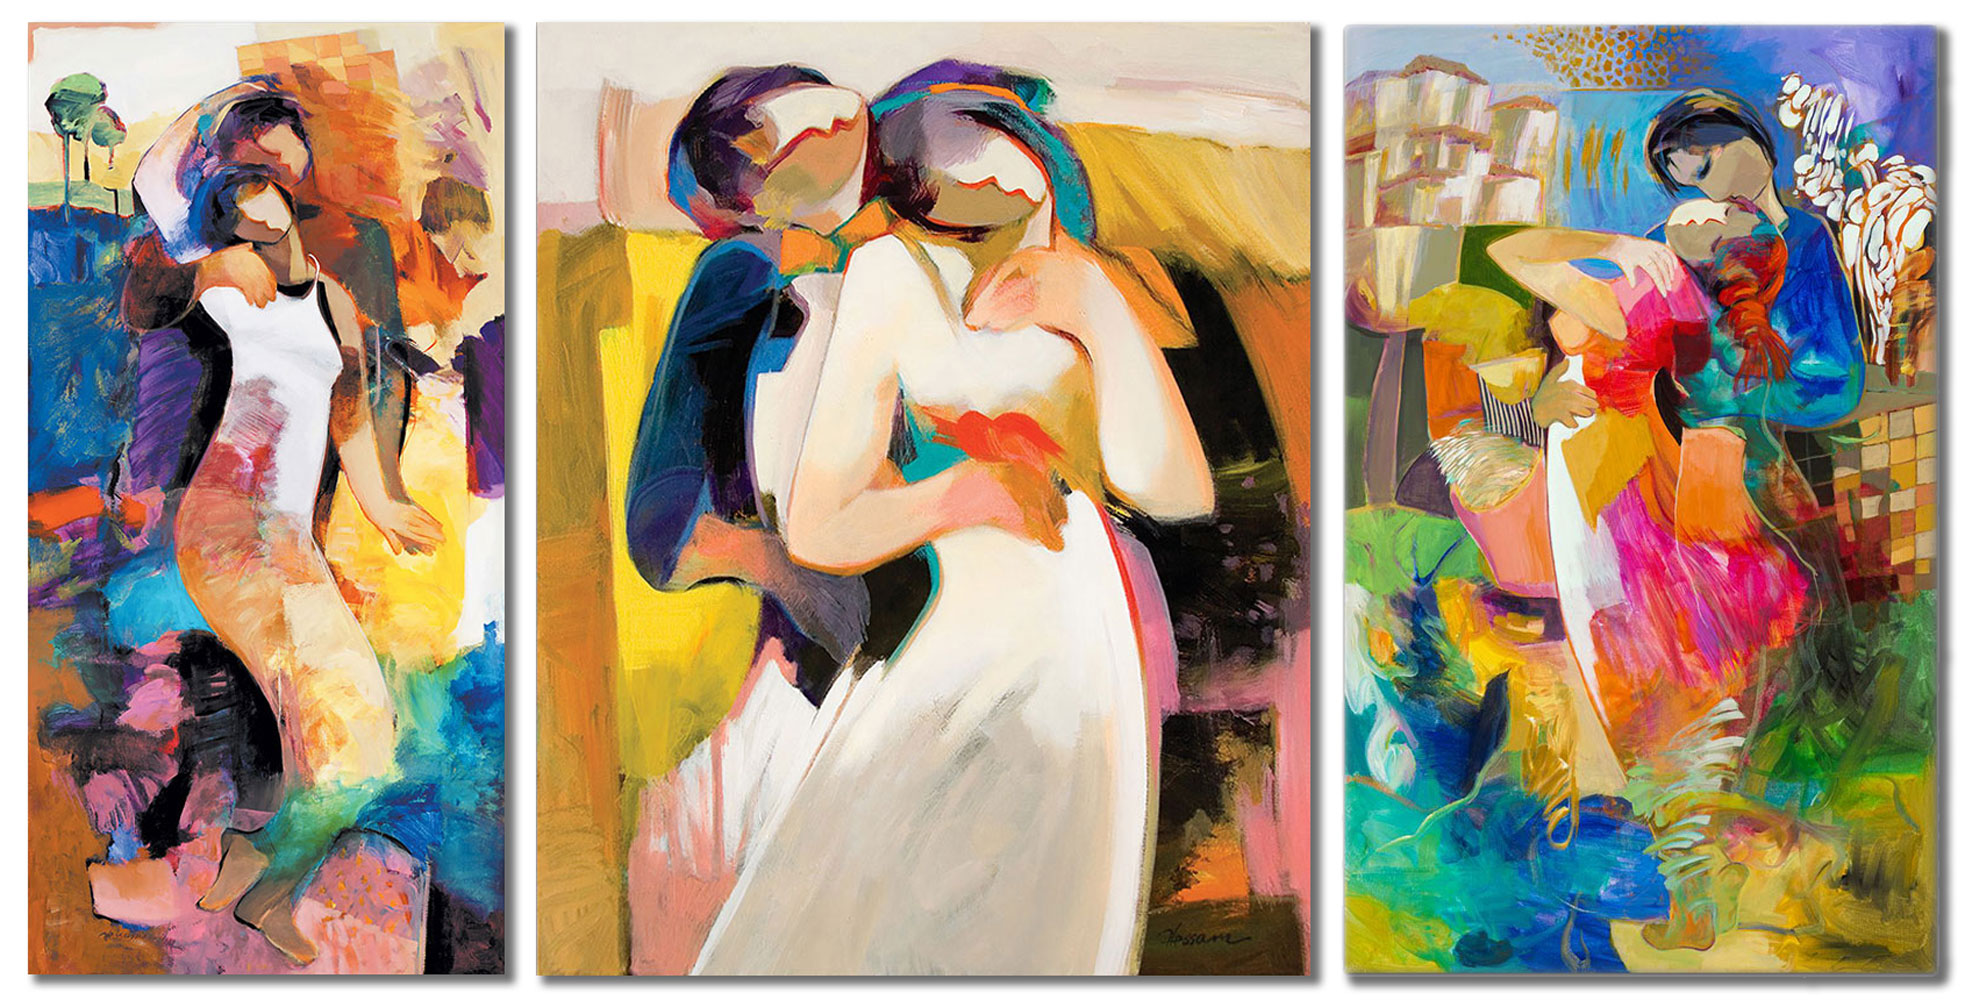 Lovers & Romance: The Fine Art of Love After-Solitude by Hessam Abrishami. Hessam paints abstract, contemporary figures interacting with each other and stunning environments. Each painting is full of vibrant colors, and bold shapes to create stunning compositions.